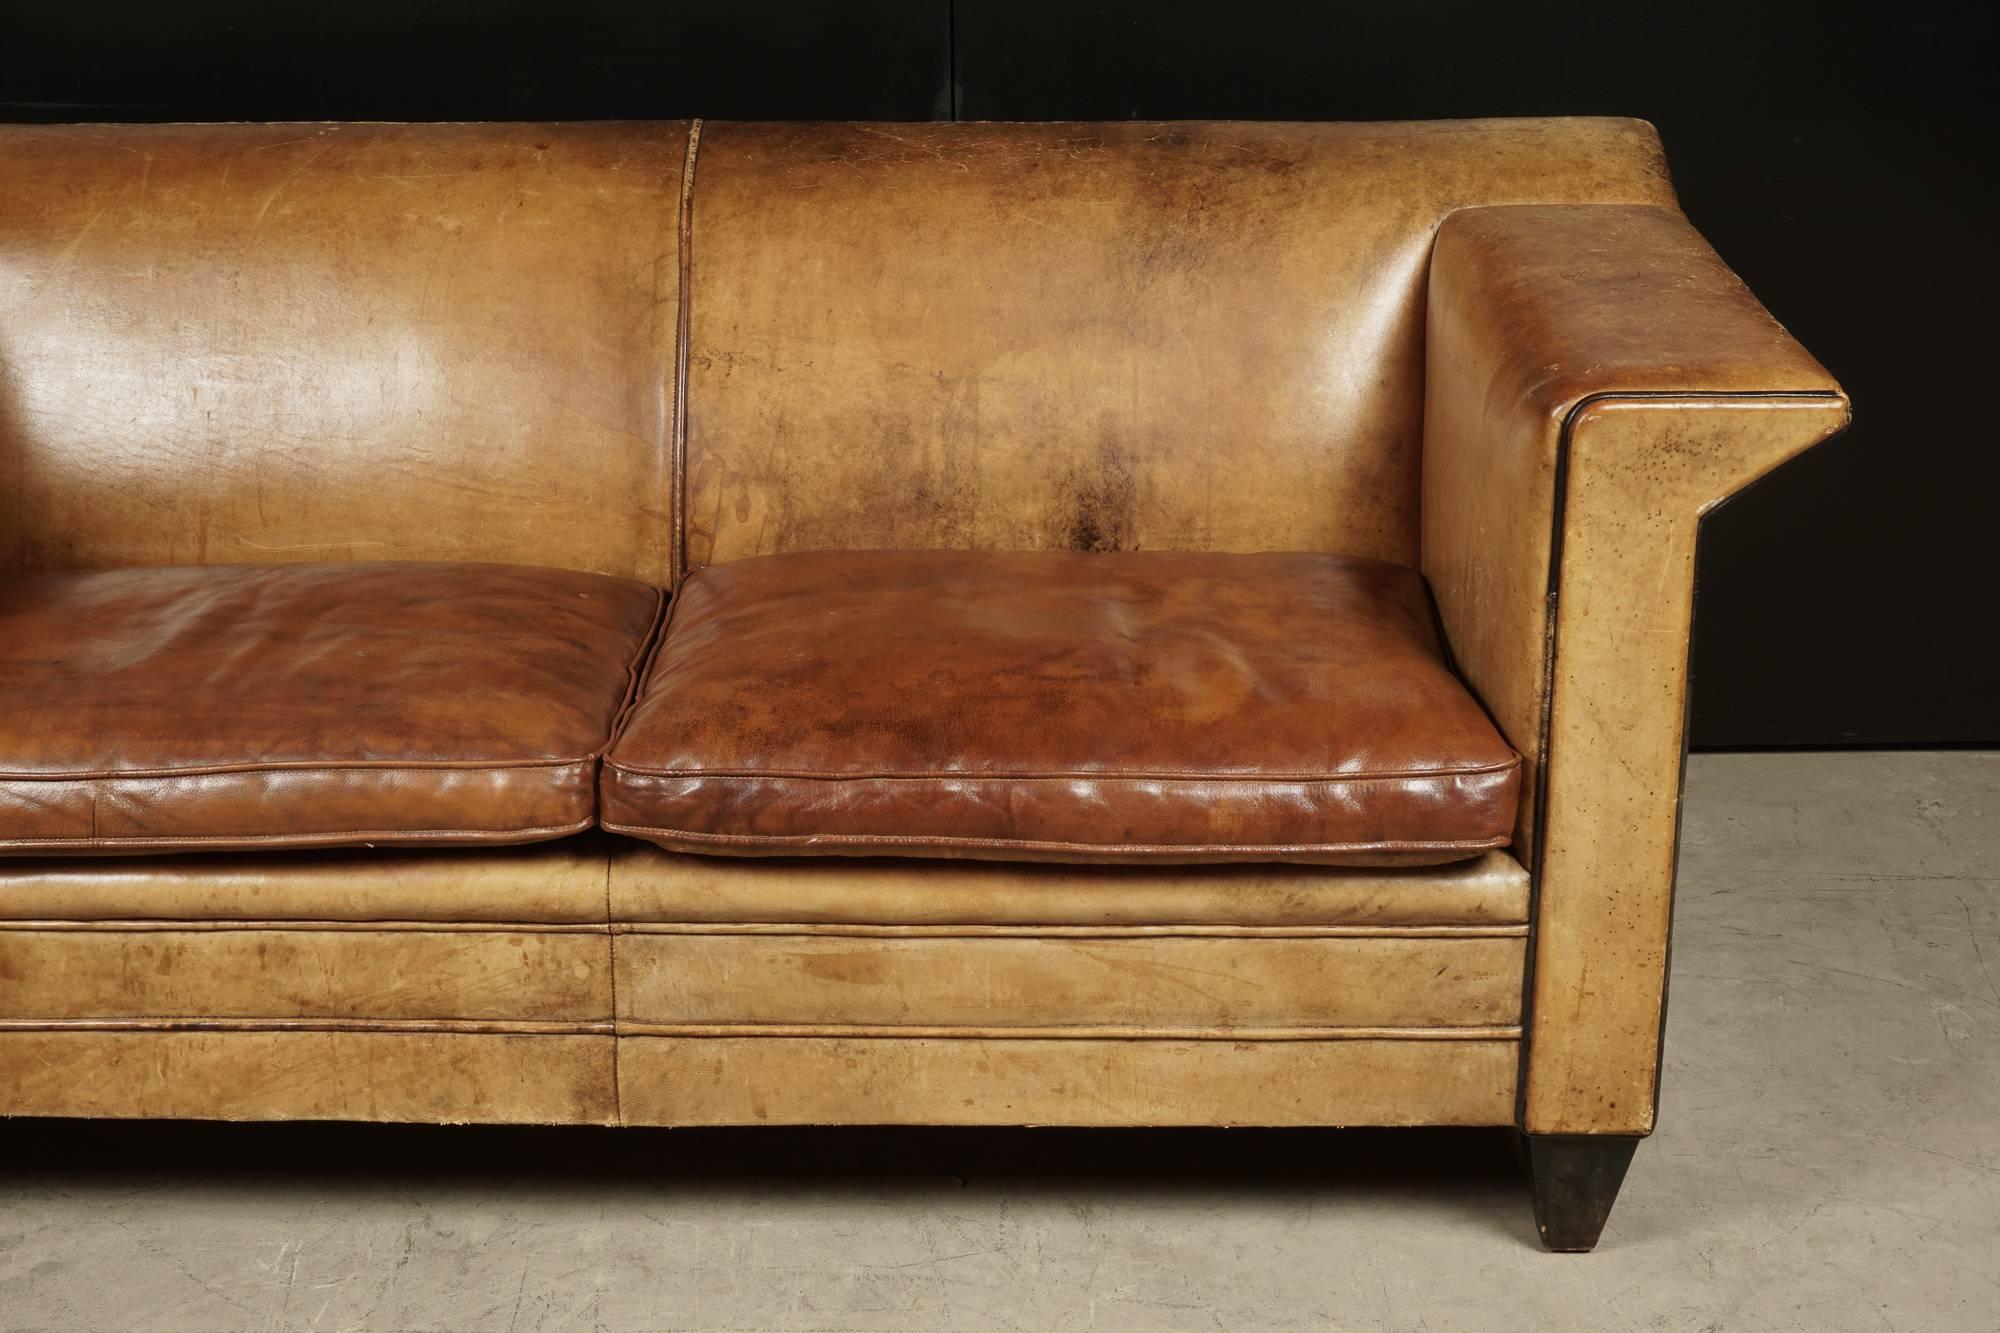 Rare Midcentury Leather Sofa With Profiled Arms and Feet.  Cognac leather upholstery.  Feet covered with black leather.